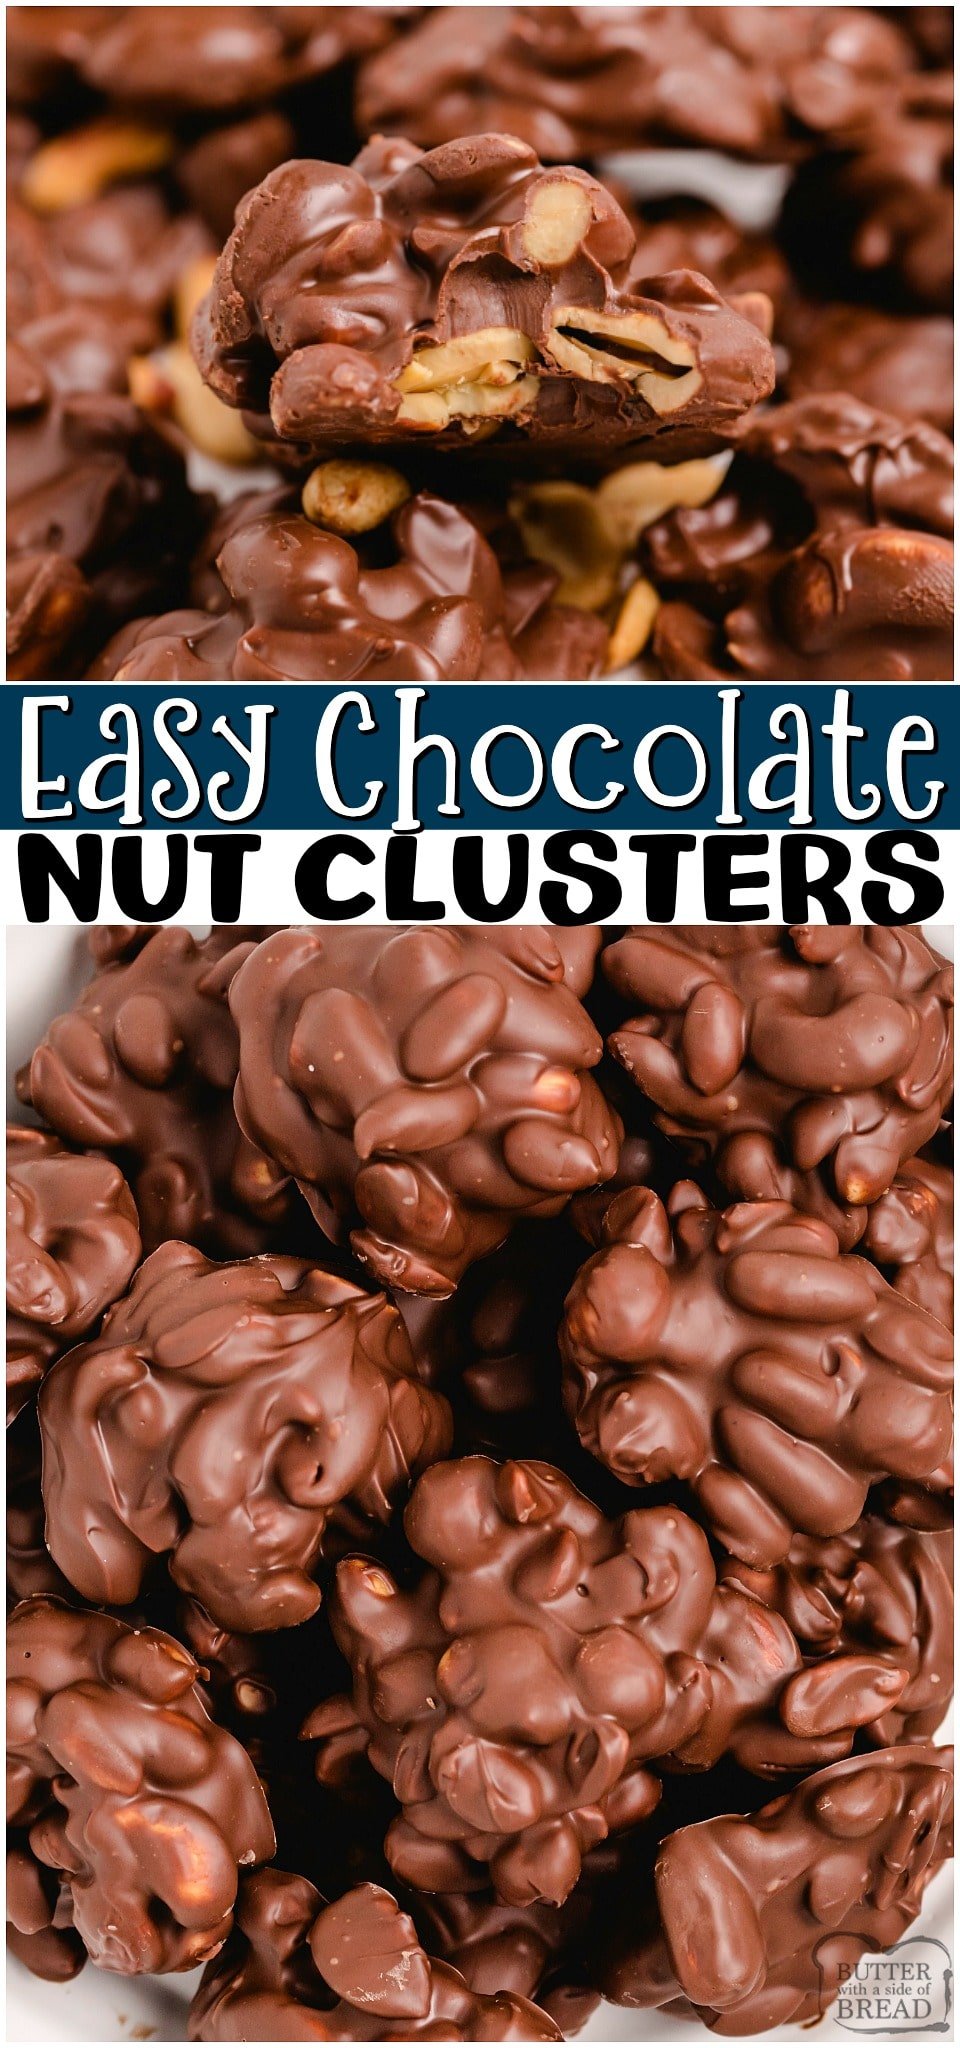 Chocolate Nut clusters are a fun & simple holiday treat! Salted Nuts covered in rich chocolate cooled & set into perfect candy clusters for gift trays!